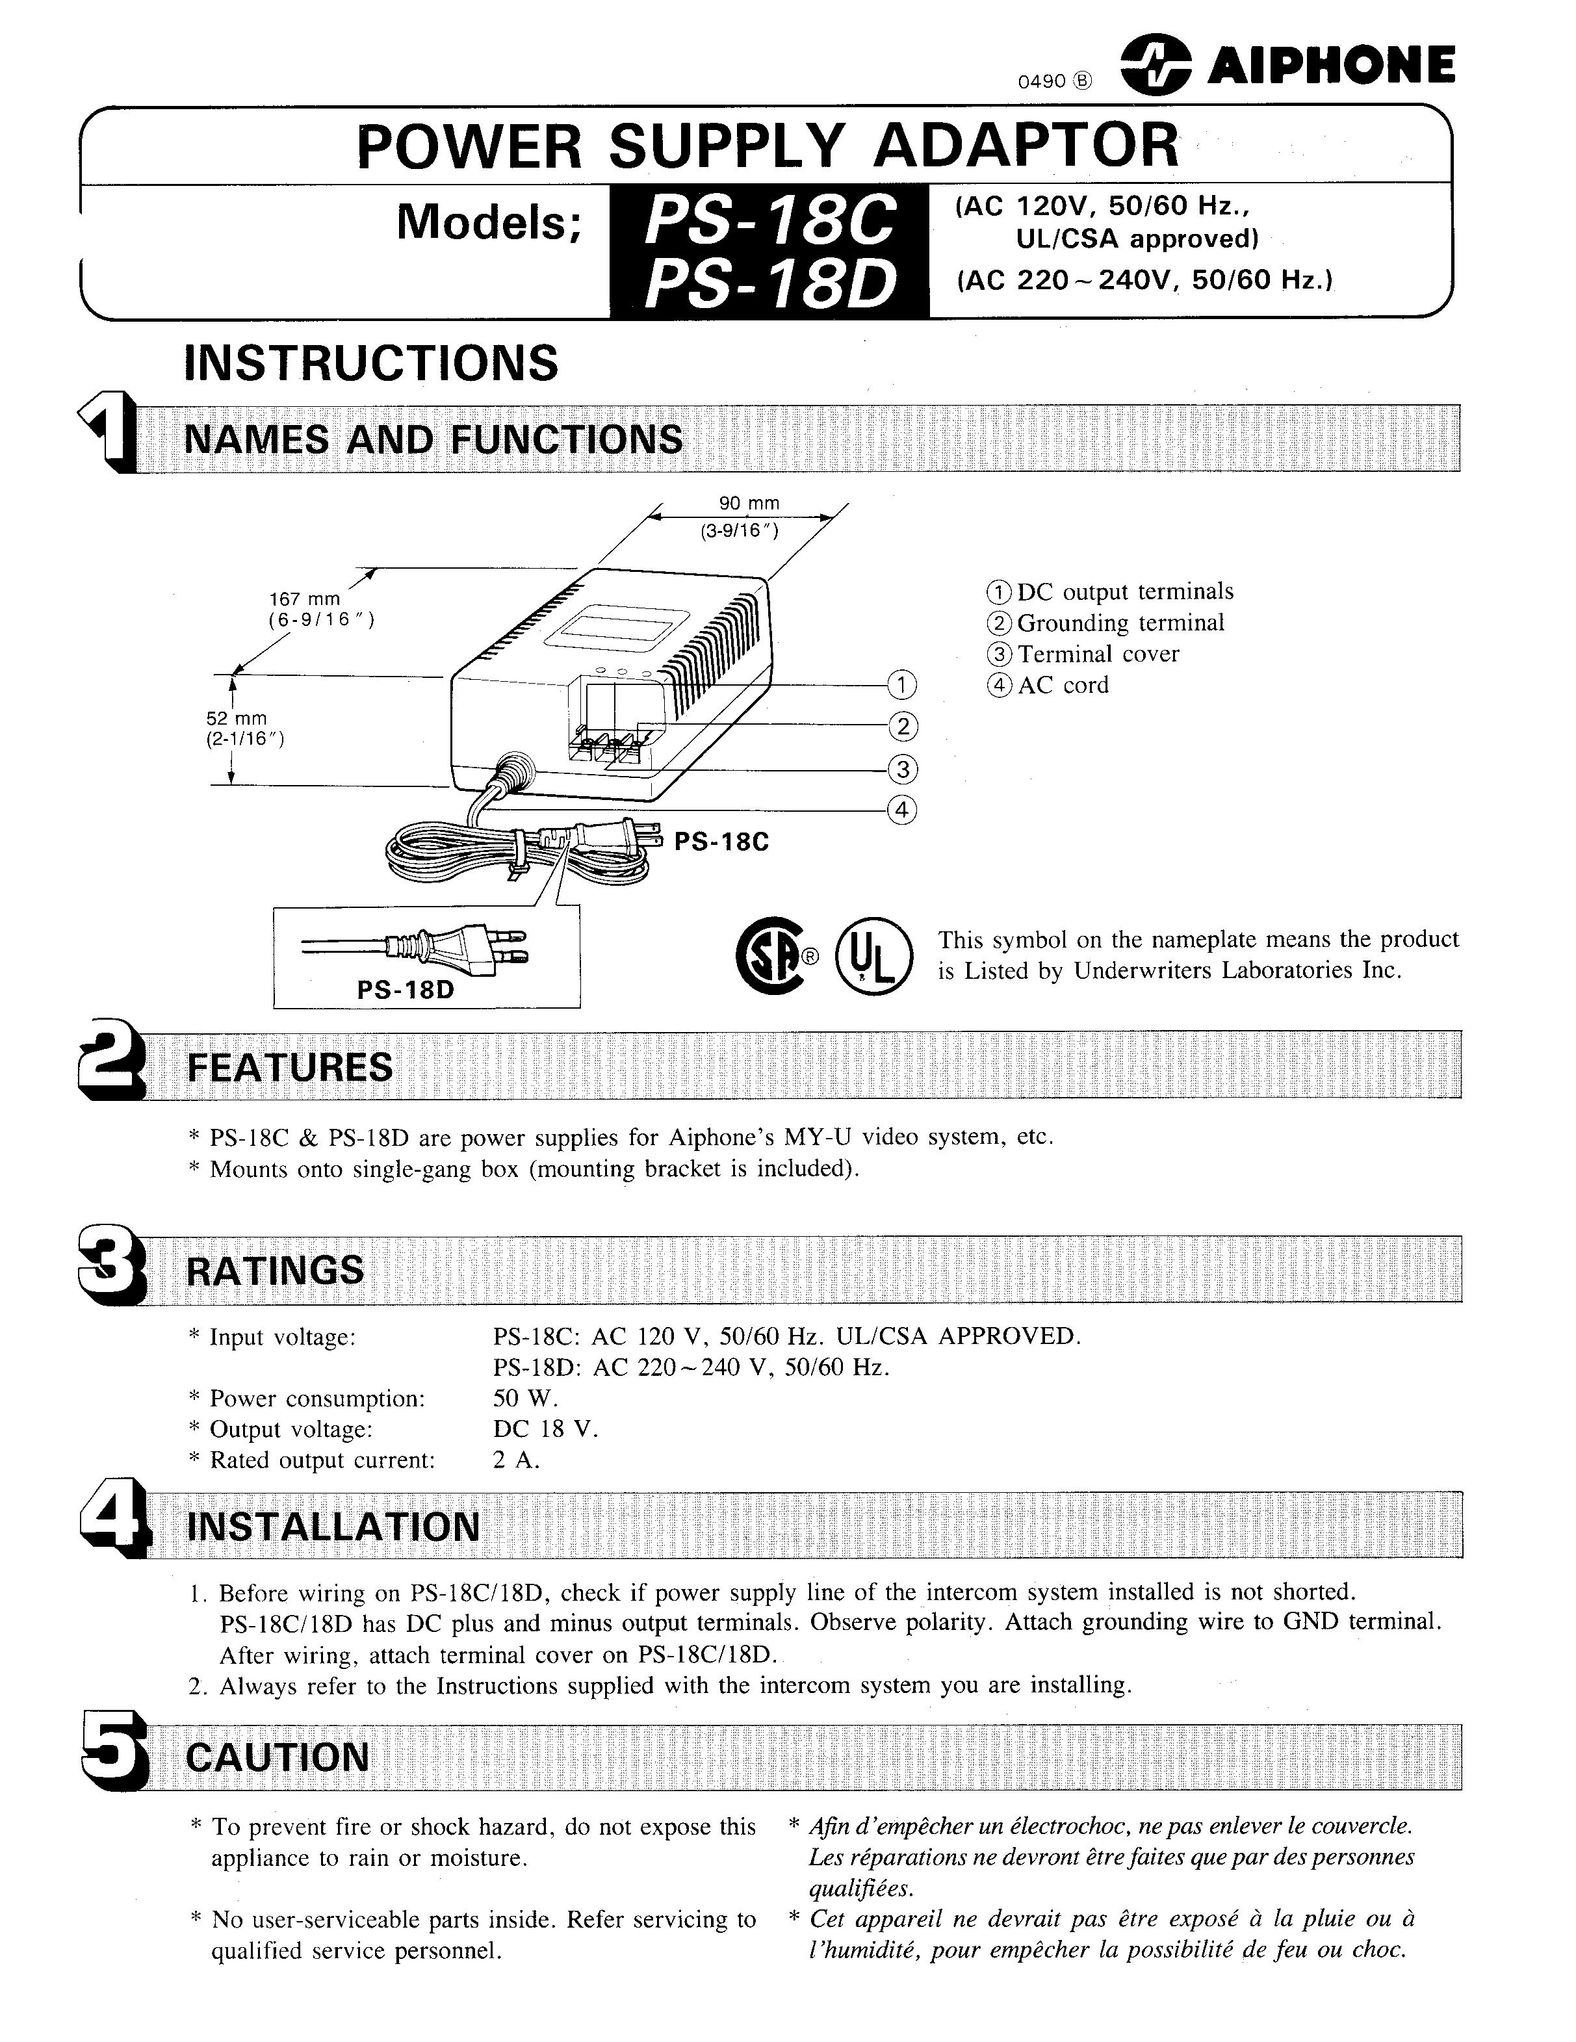 Aiphone PS-18D Power Supply User Manual